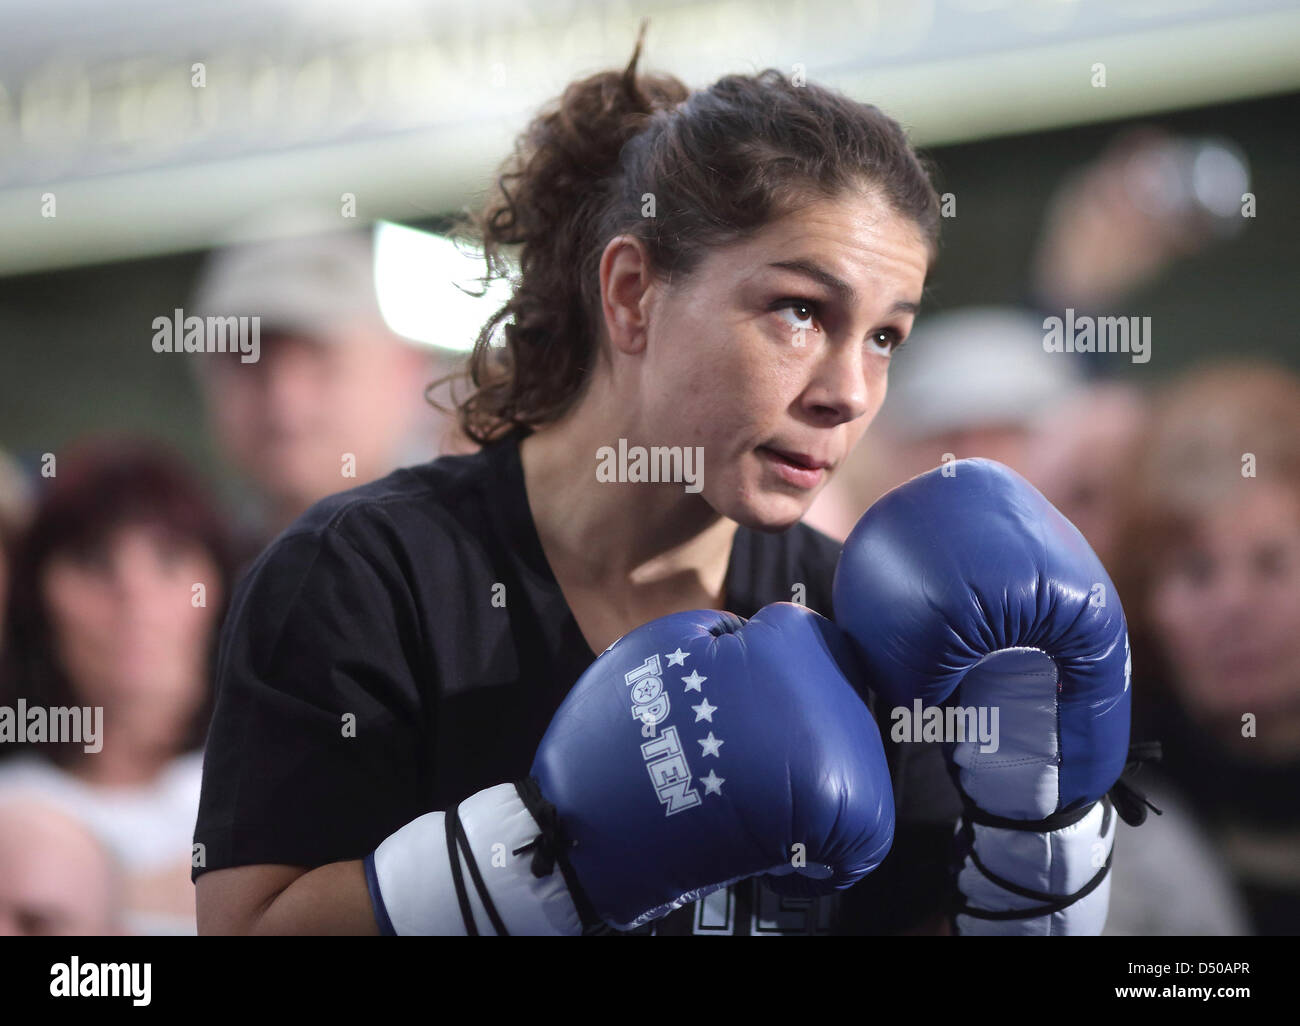 Overbevisende ressource levering US boxing pro and featherweight world champion Melissa McMorrow in action  during a public practice session in Magdeburg, Germany, 20 March 2013.  McMorrow is preparing to fight in the WIBF title bout